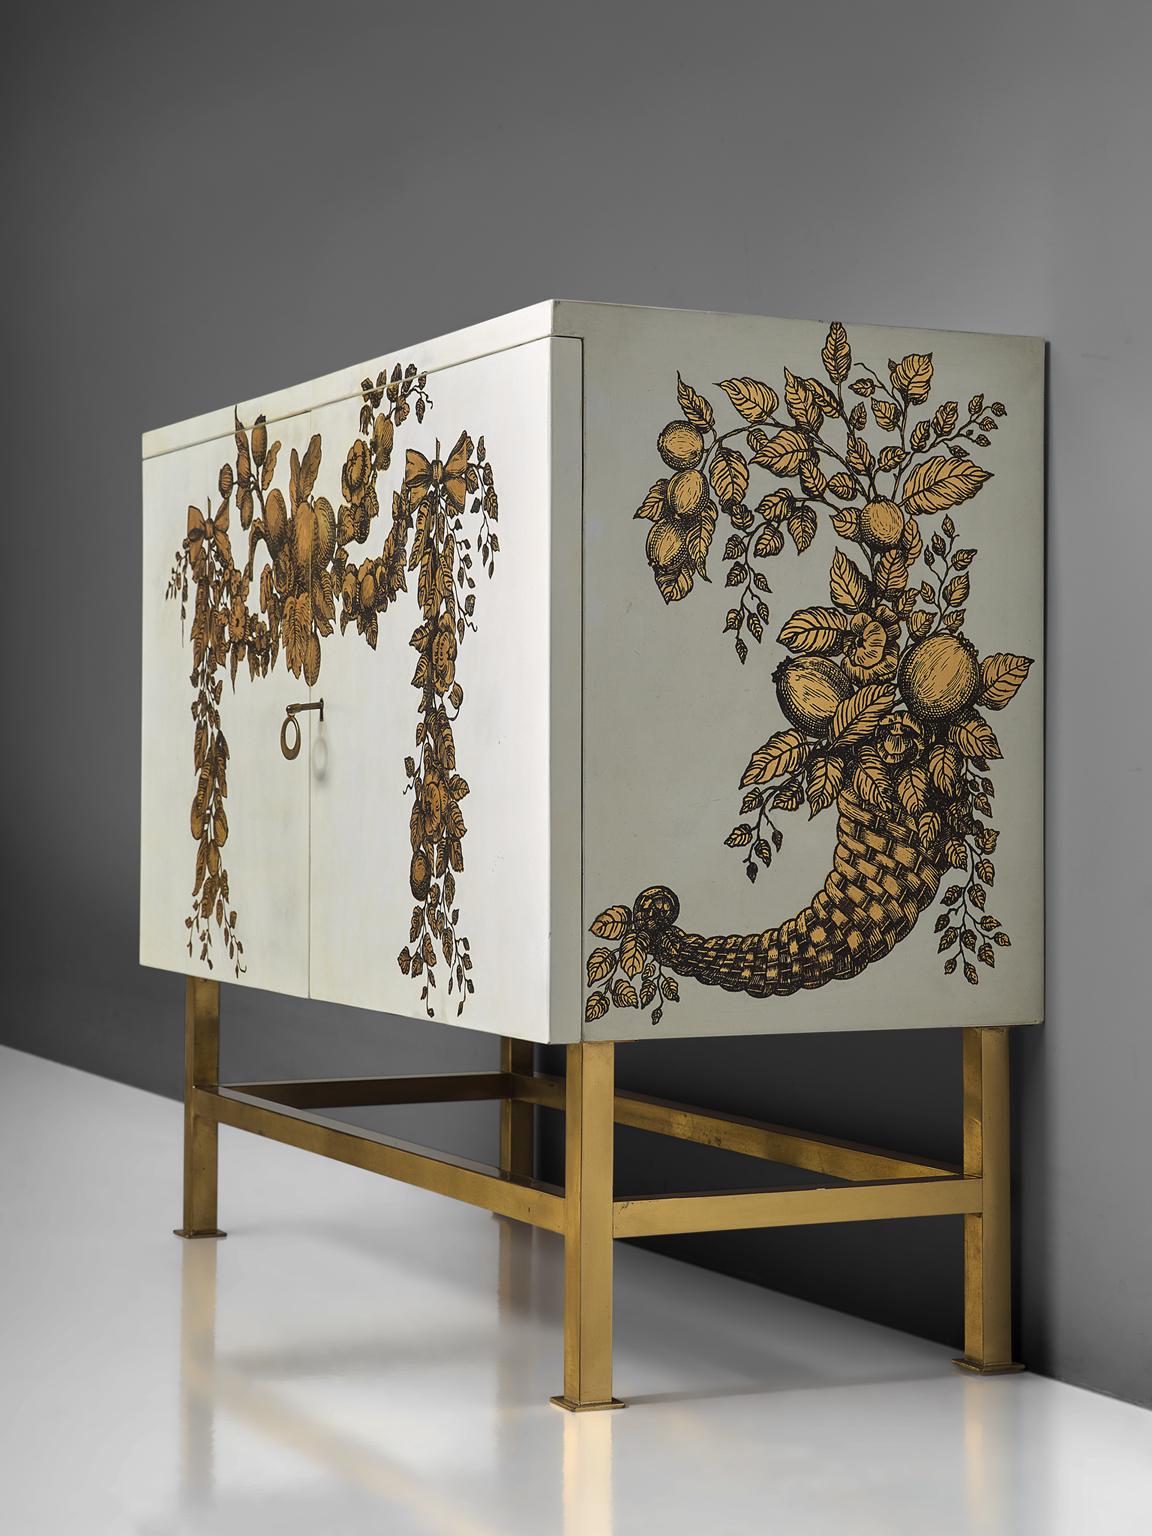 Piero Fornasetti Cabinet “Panoplie” with Lithographic Print (Mitte des 20. Jahrhunderts)